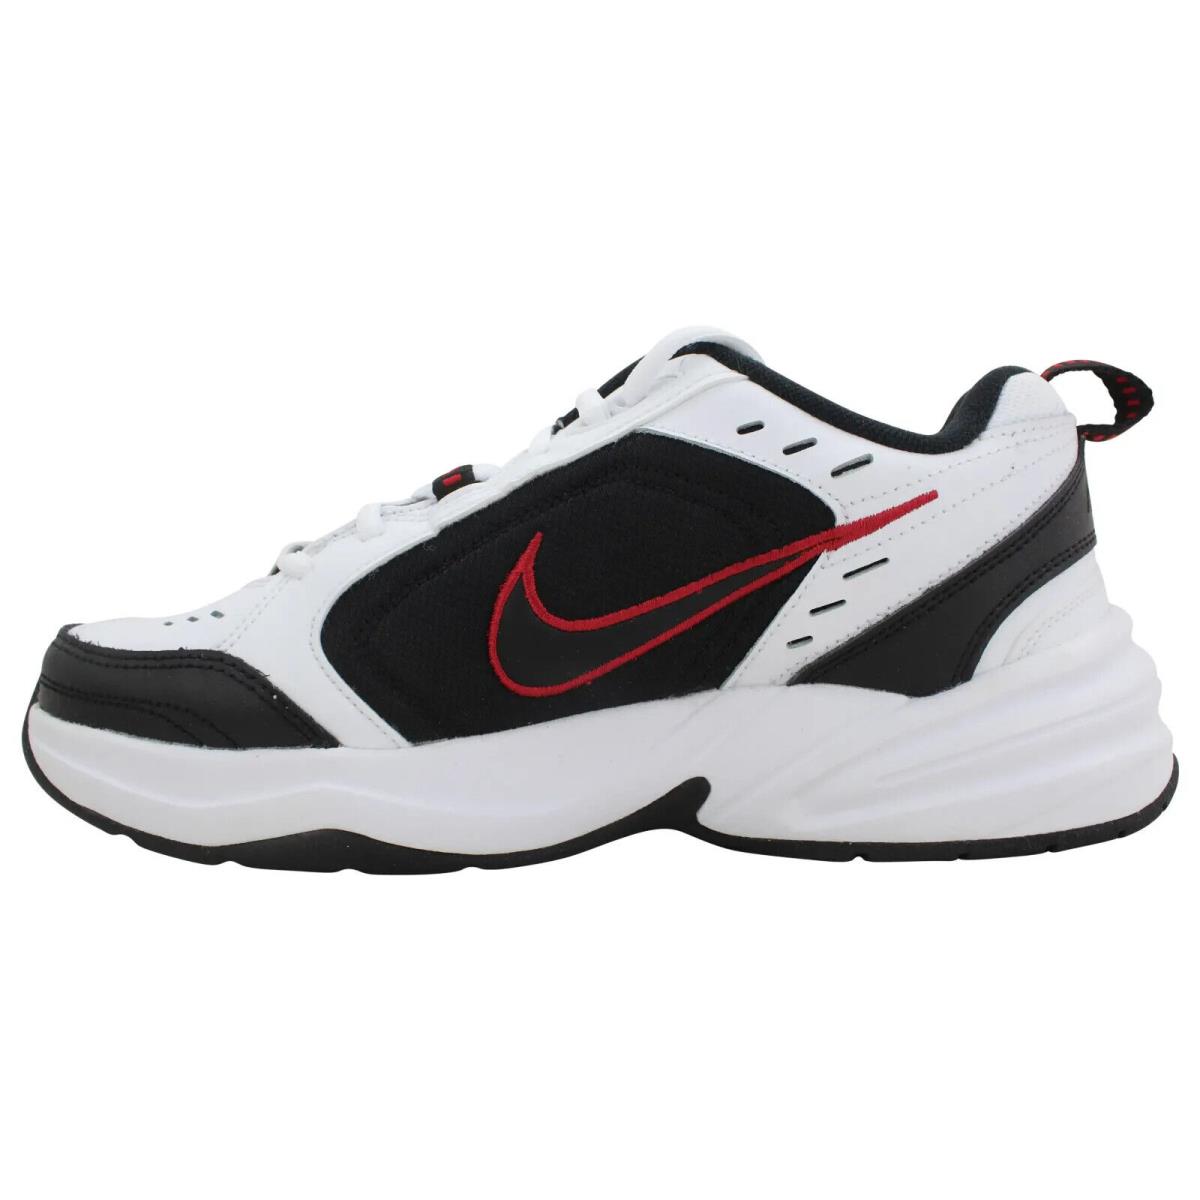 Nike shoes  - White/Black/Red 5